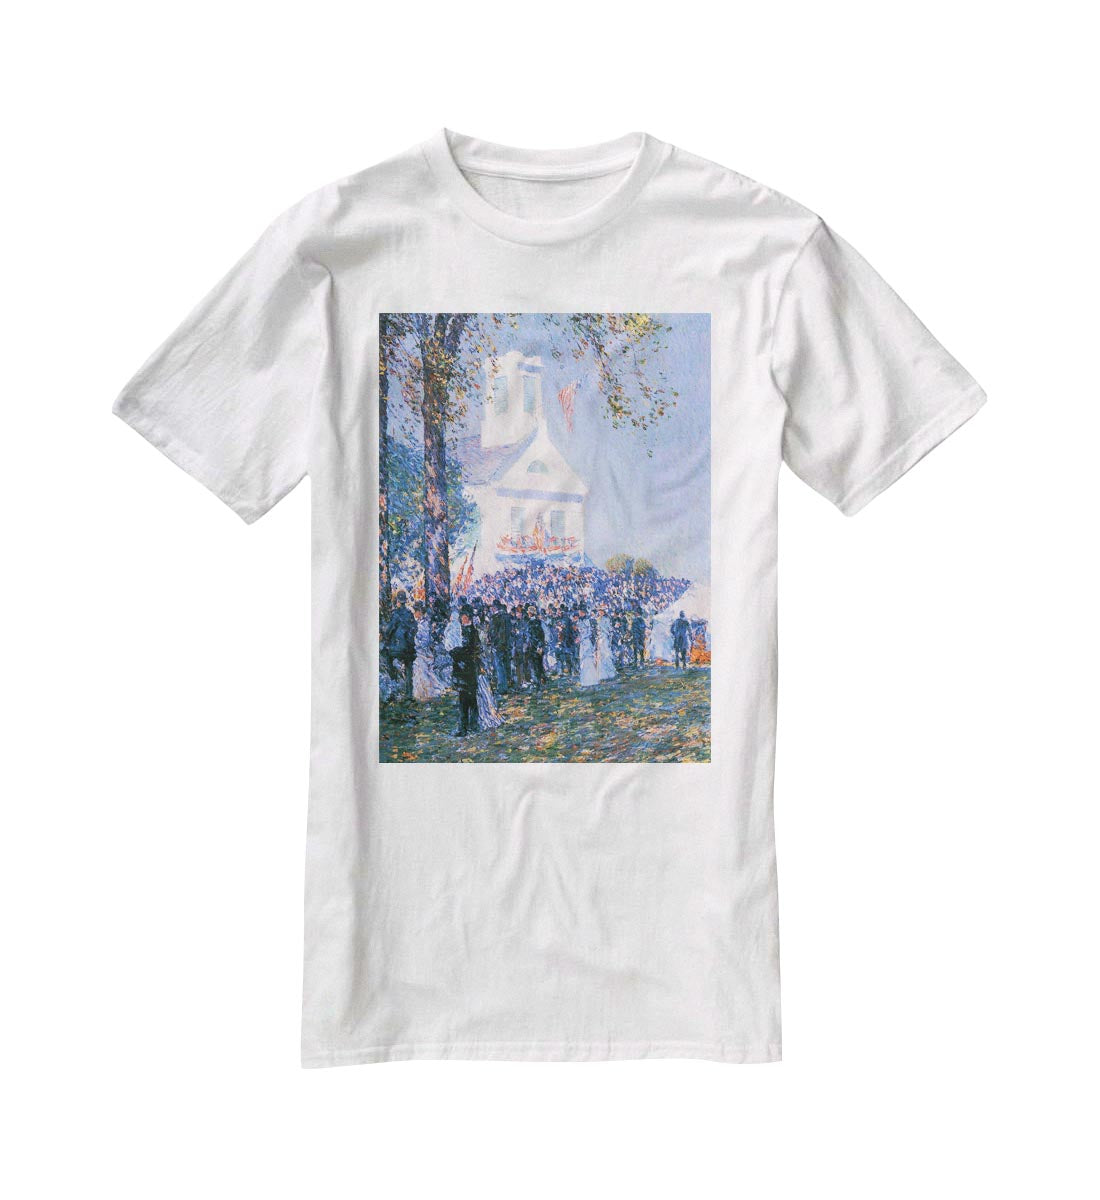 Harvest in a village in New England by Hassam T-Shirt - Canvas Art Rocks - 5